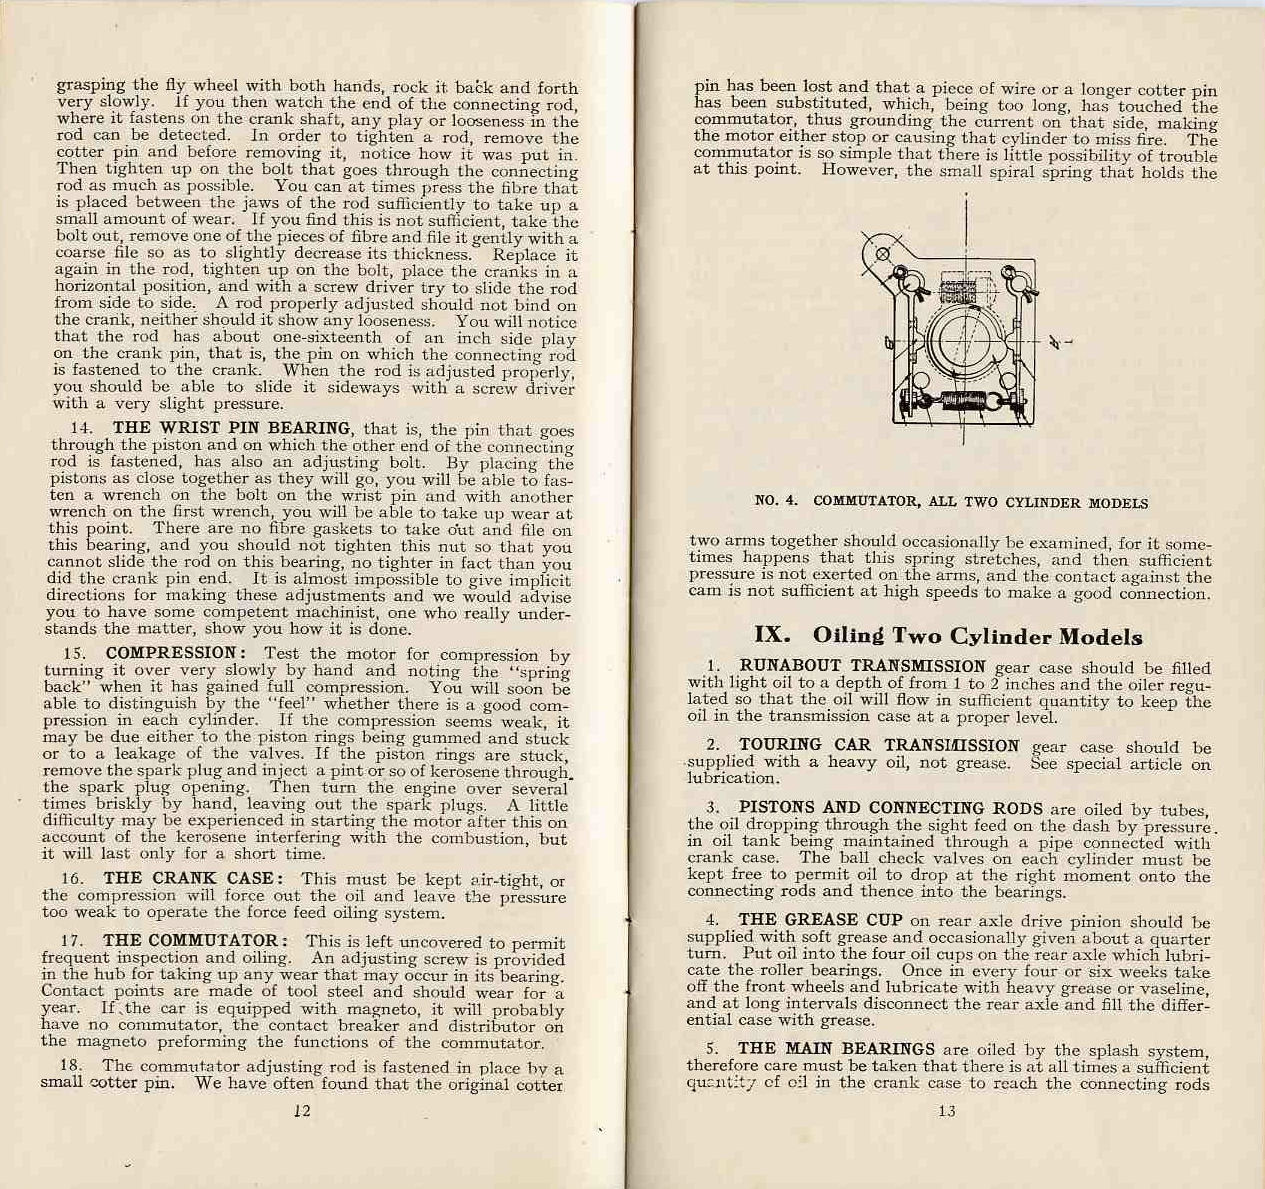 1909 Maxwell Instructions-12-13